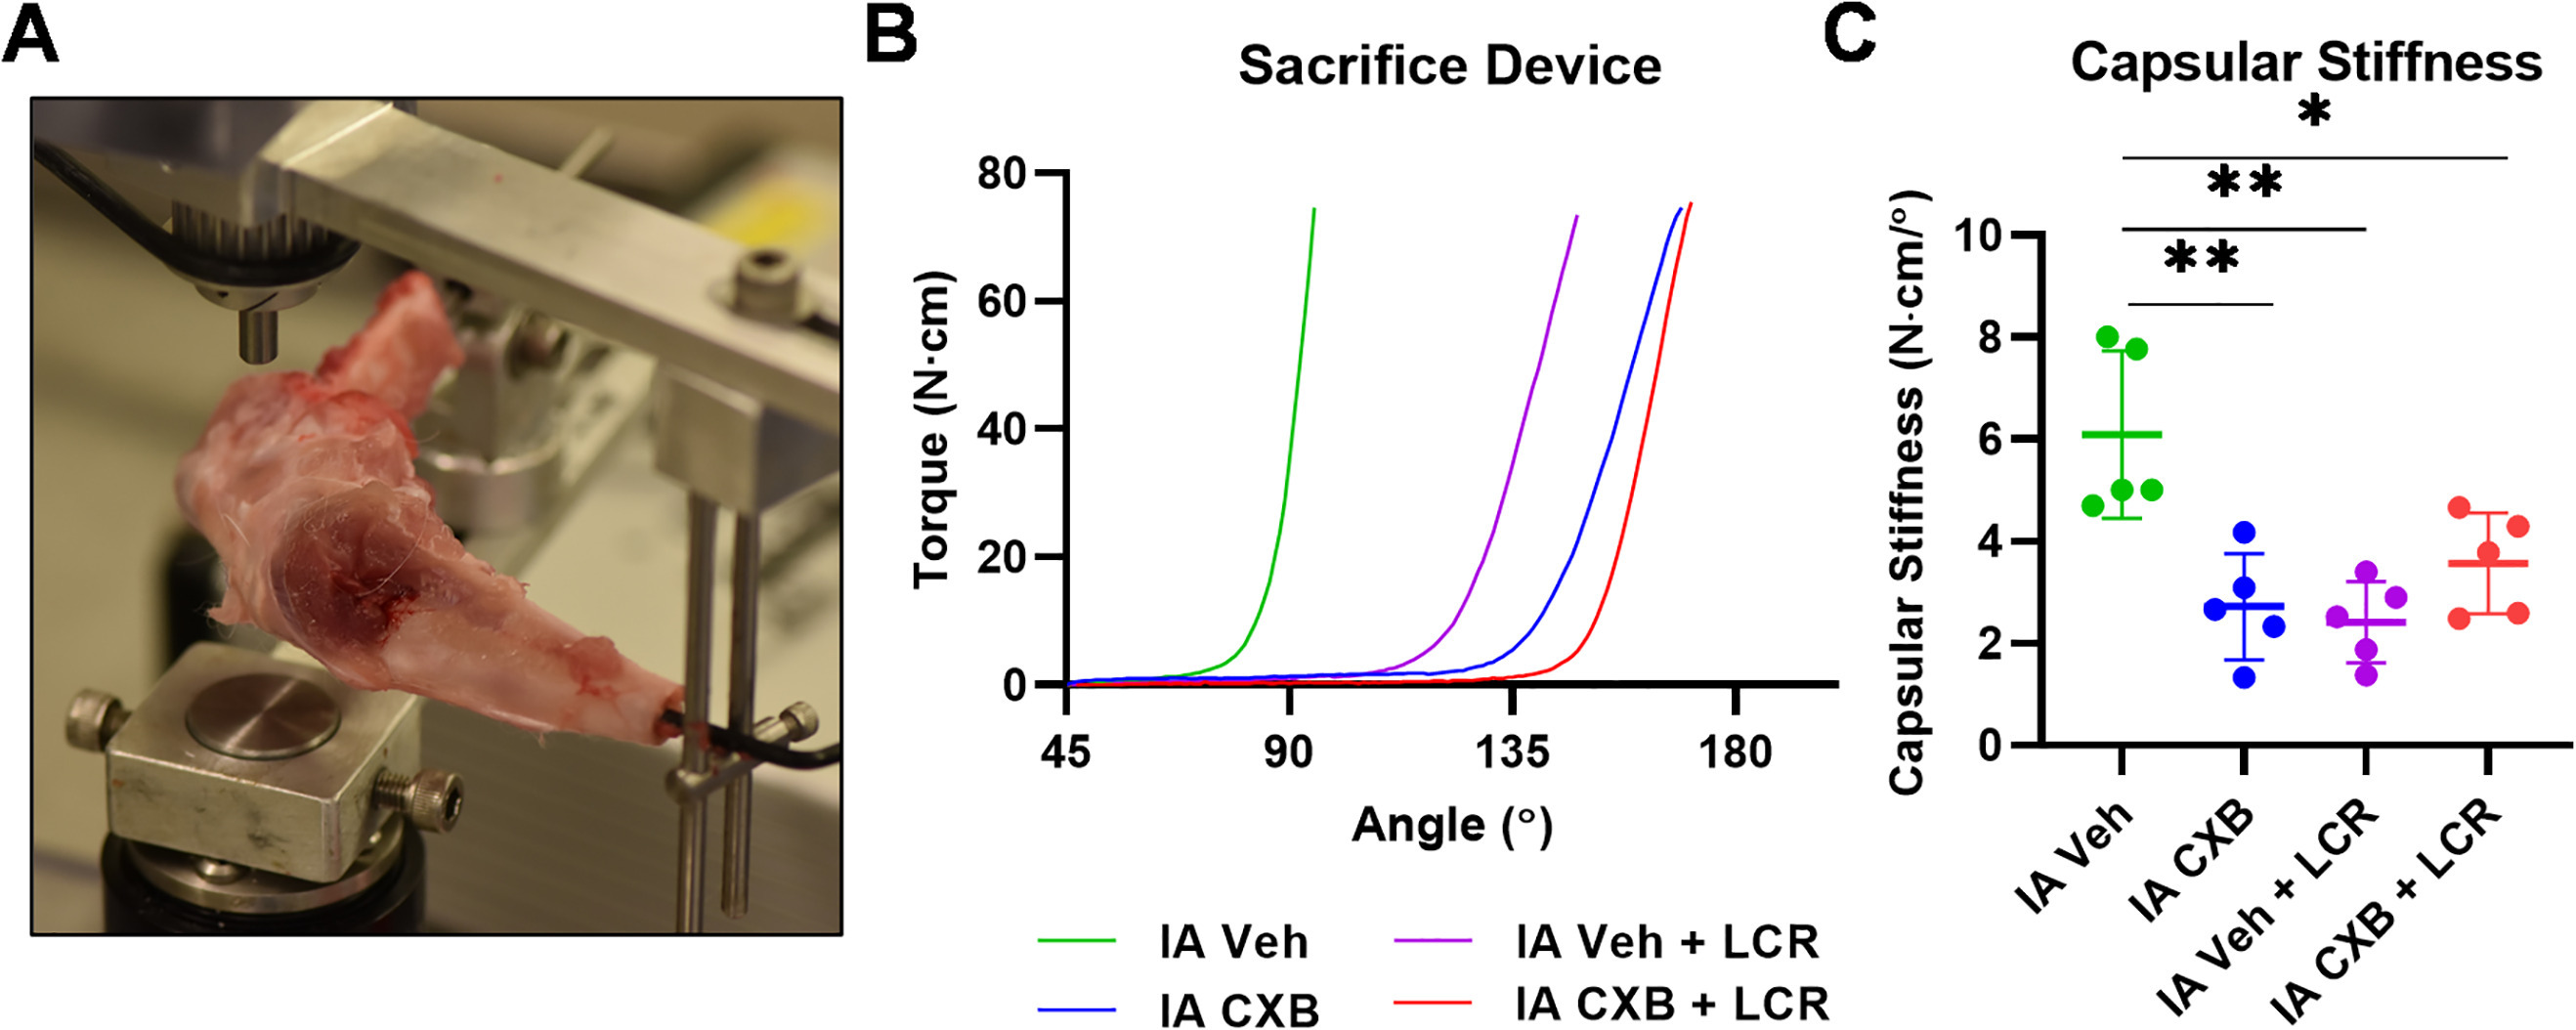 Fig. 3 
            Intra-articular (IA) celecoxib (CXB) injection reduces capsular stiffness. a) Capsular stiffness measurements were obtained from disarticulated rabbit limbs on a dynamic load cell device after sacrifice at 24 weeks. b) Mean curves generated by the dynamic load cell sacrifice device for each treatment group. c) Capsular stiffness data defined as the slope of a tangential line to the curves shown in panel B. The graphs depict mean capsular stiffness and standard deviation (n = 5 to 6 for each group), with each data point representing one animal. When applicable, significance is noted with a standard asterisk convention (*p ≤ 0.05, **p ≤ 0.01, Mann-Whitney U test). LCR, limited capsular release; Veh, vehicle.
          